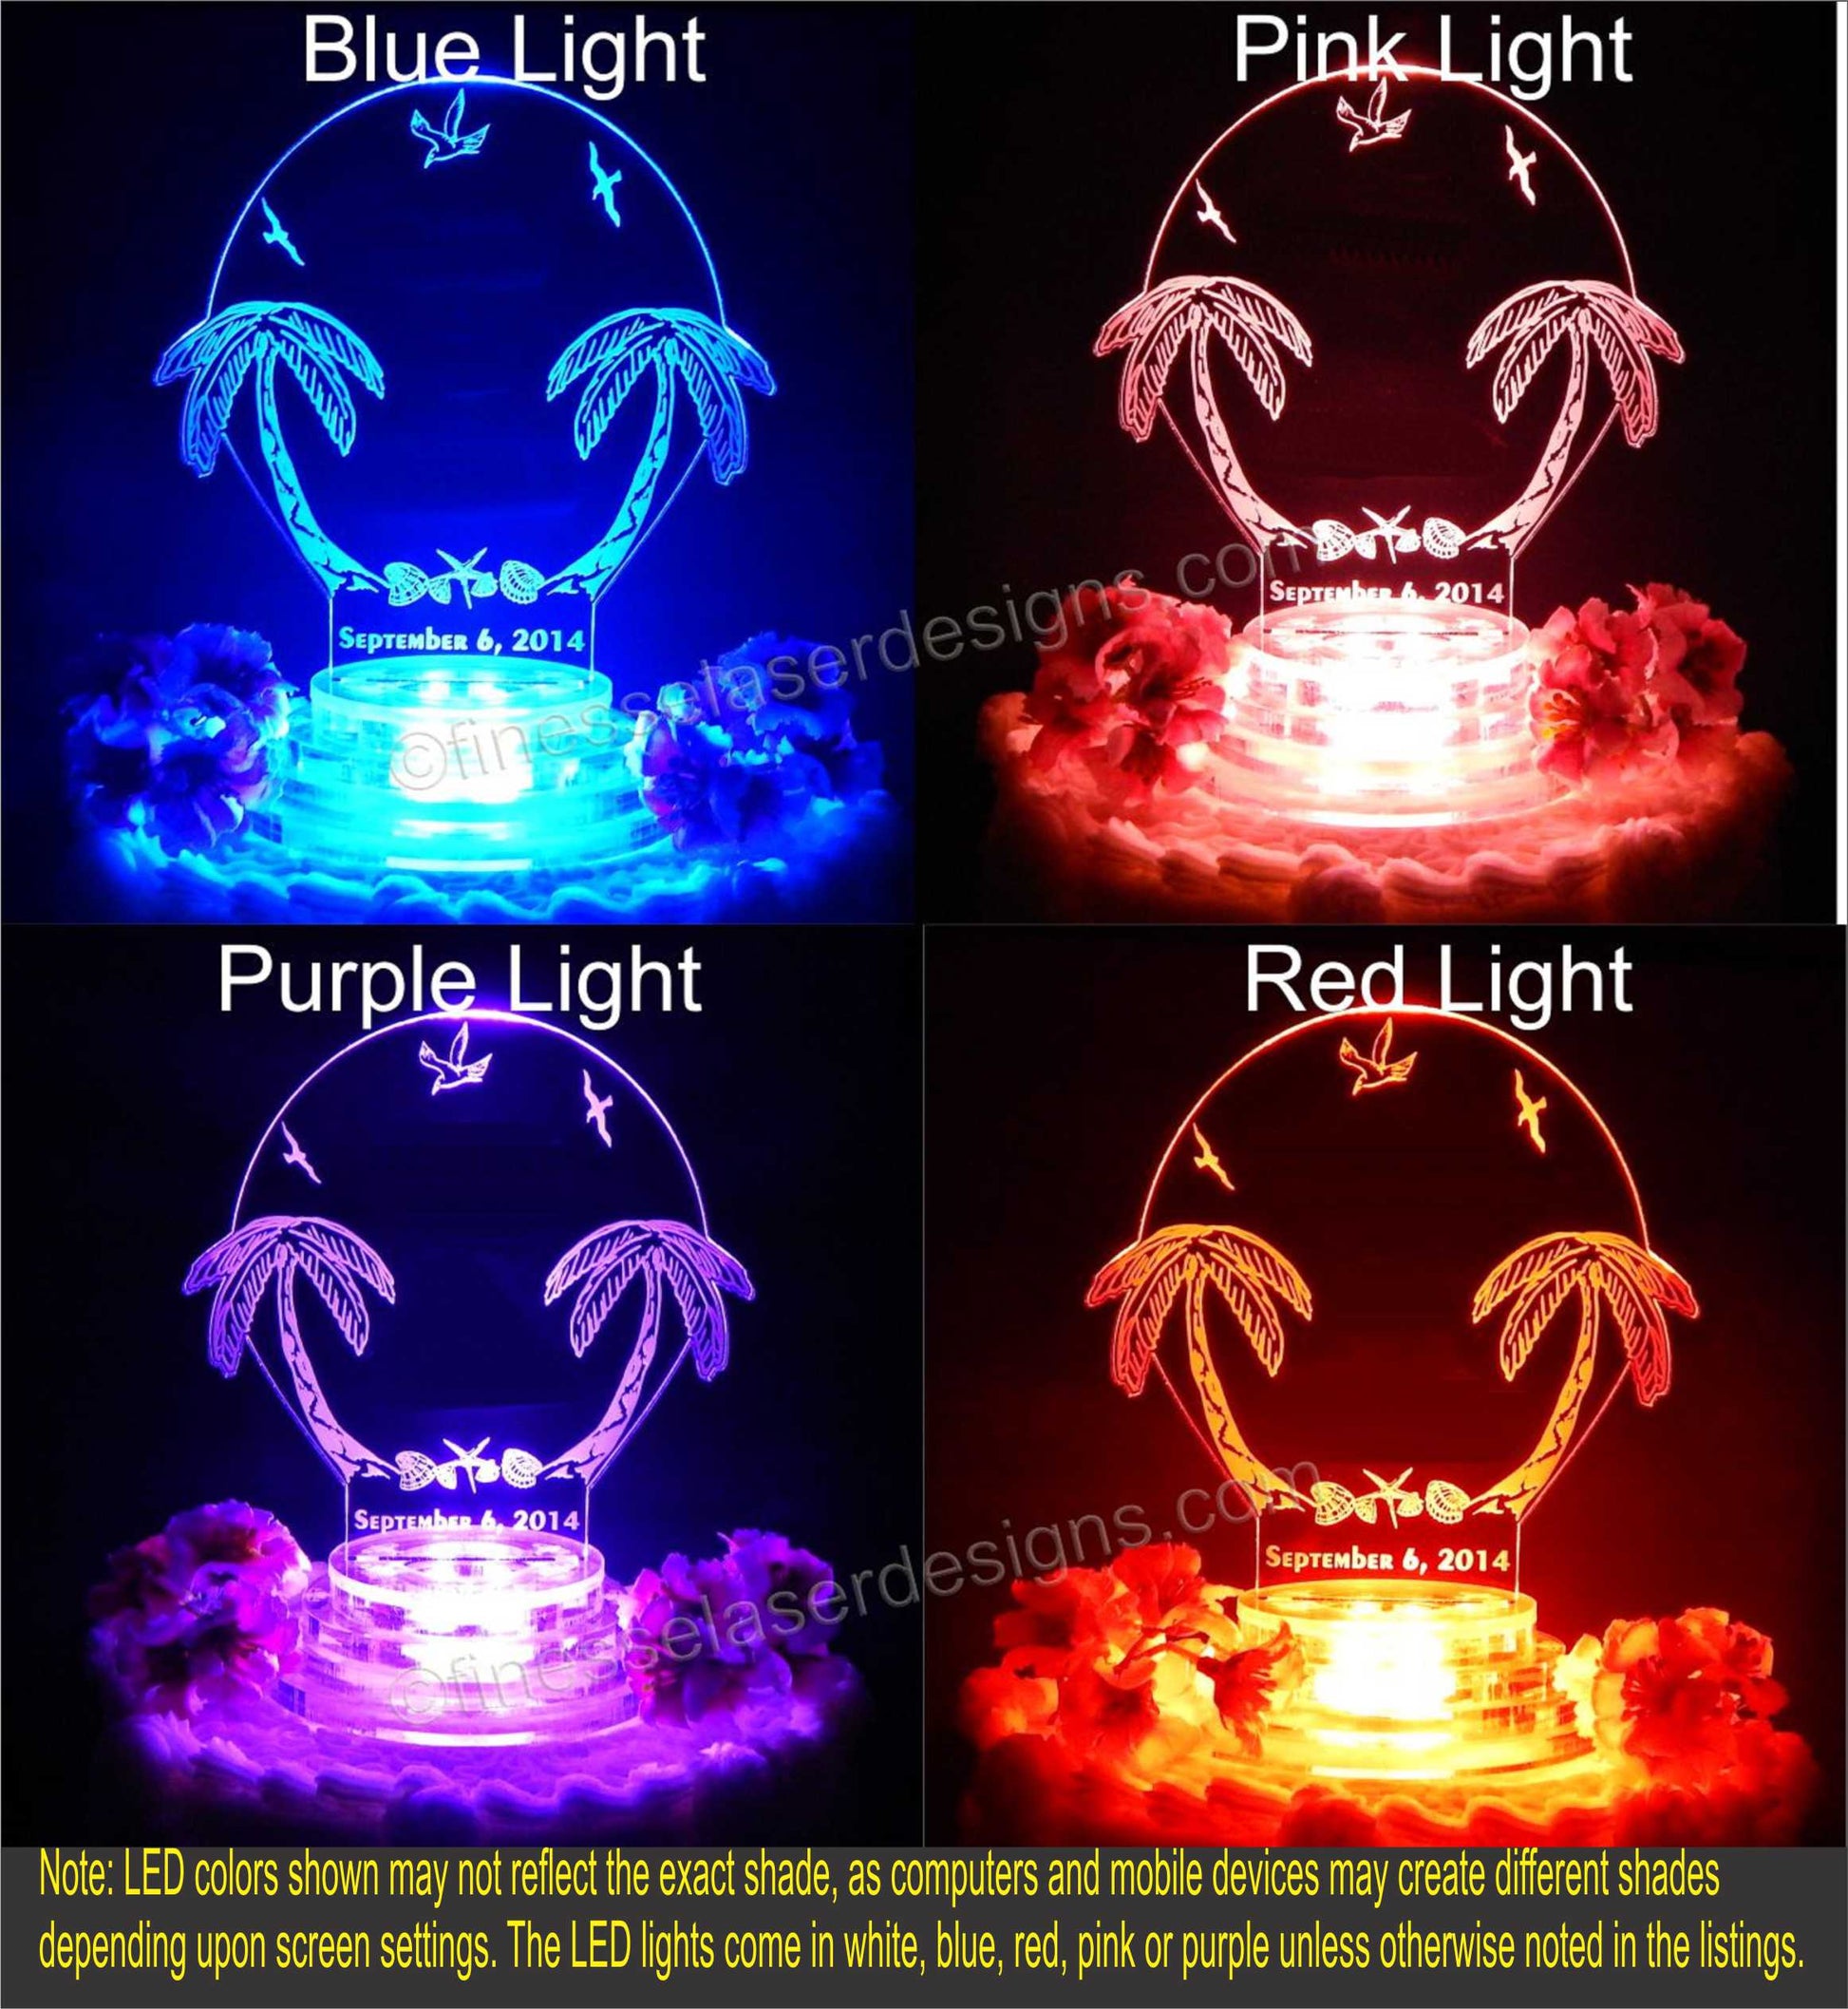 lighted views of a beach themed cake topper designed with Palm trees and seagulls, showing blue, pink, purple and red lighted views